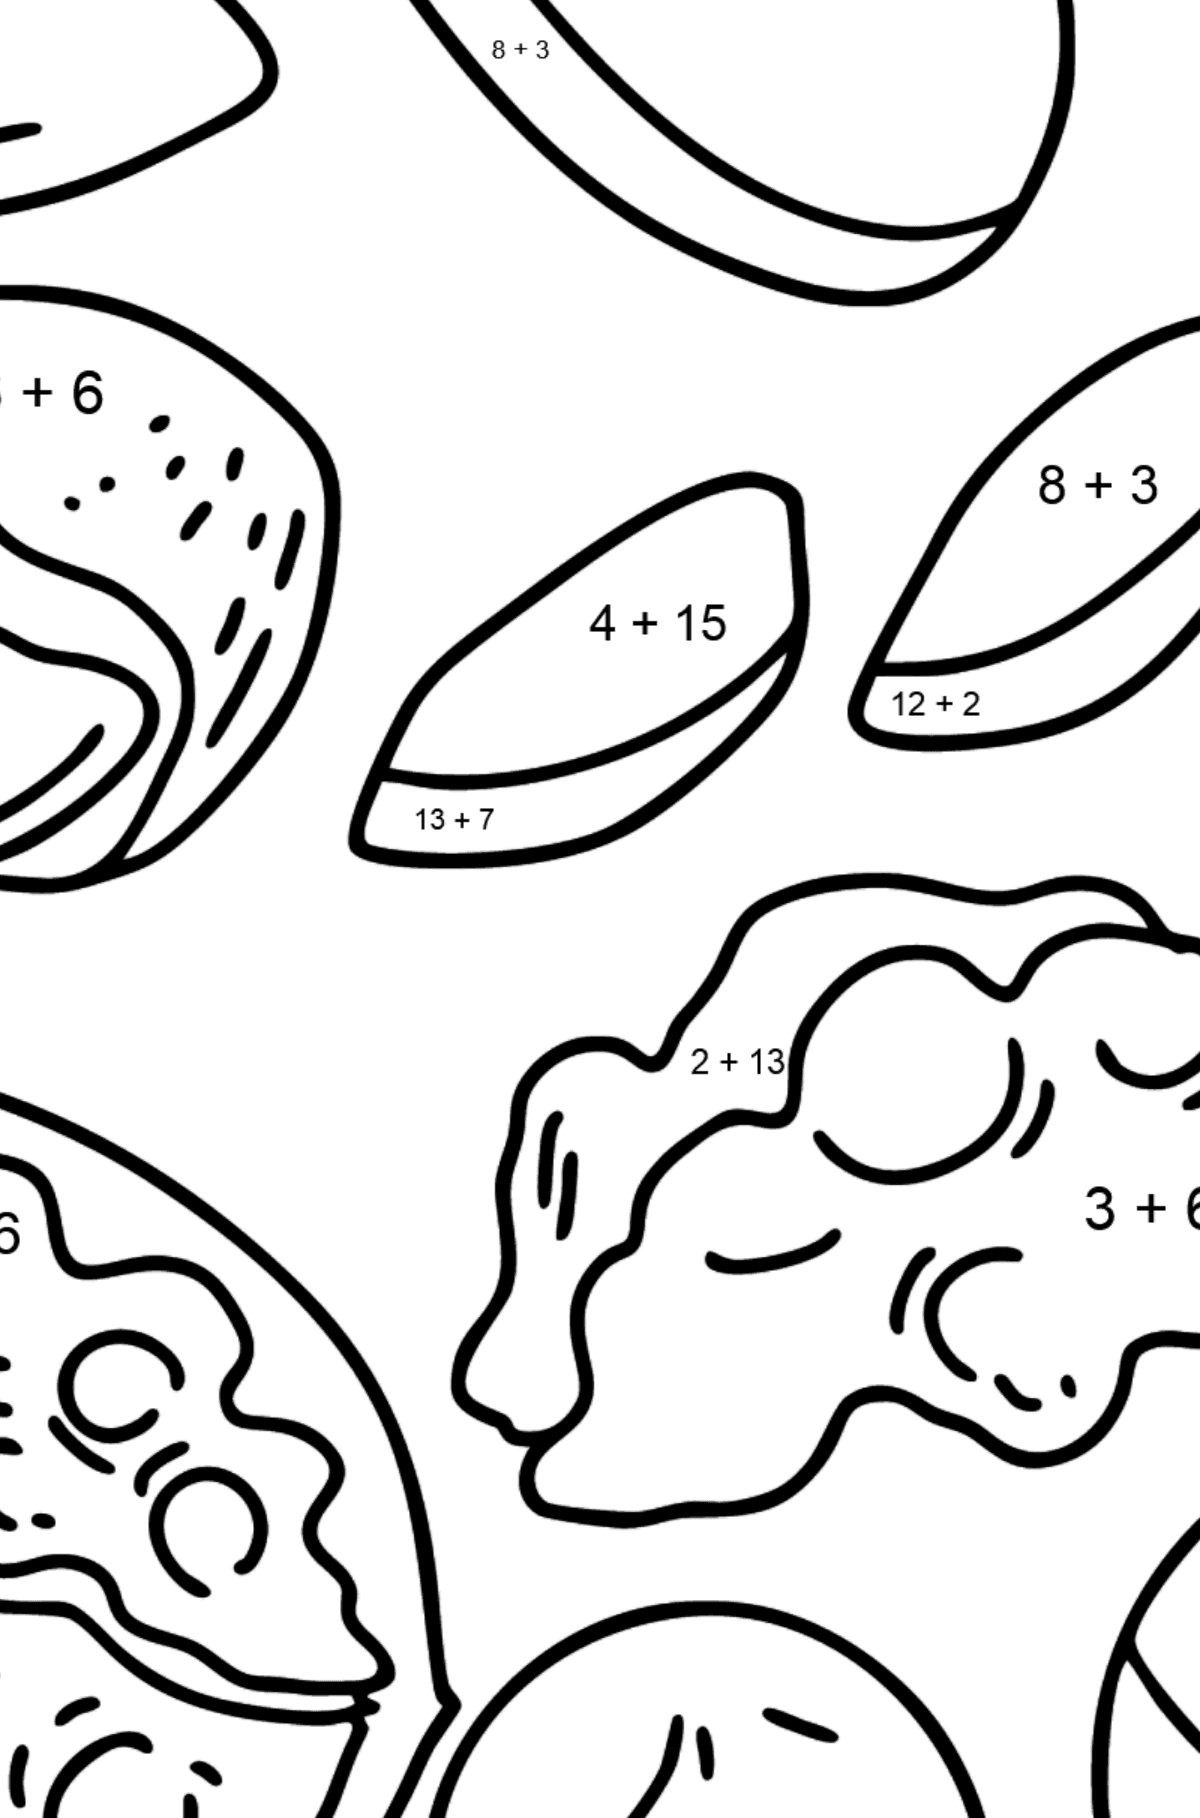 Nuts: Walnuts, Macadamia, Almonds and Peanuts coloring page - Math Coloring - Addition for Kids